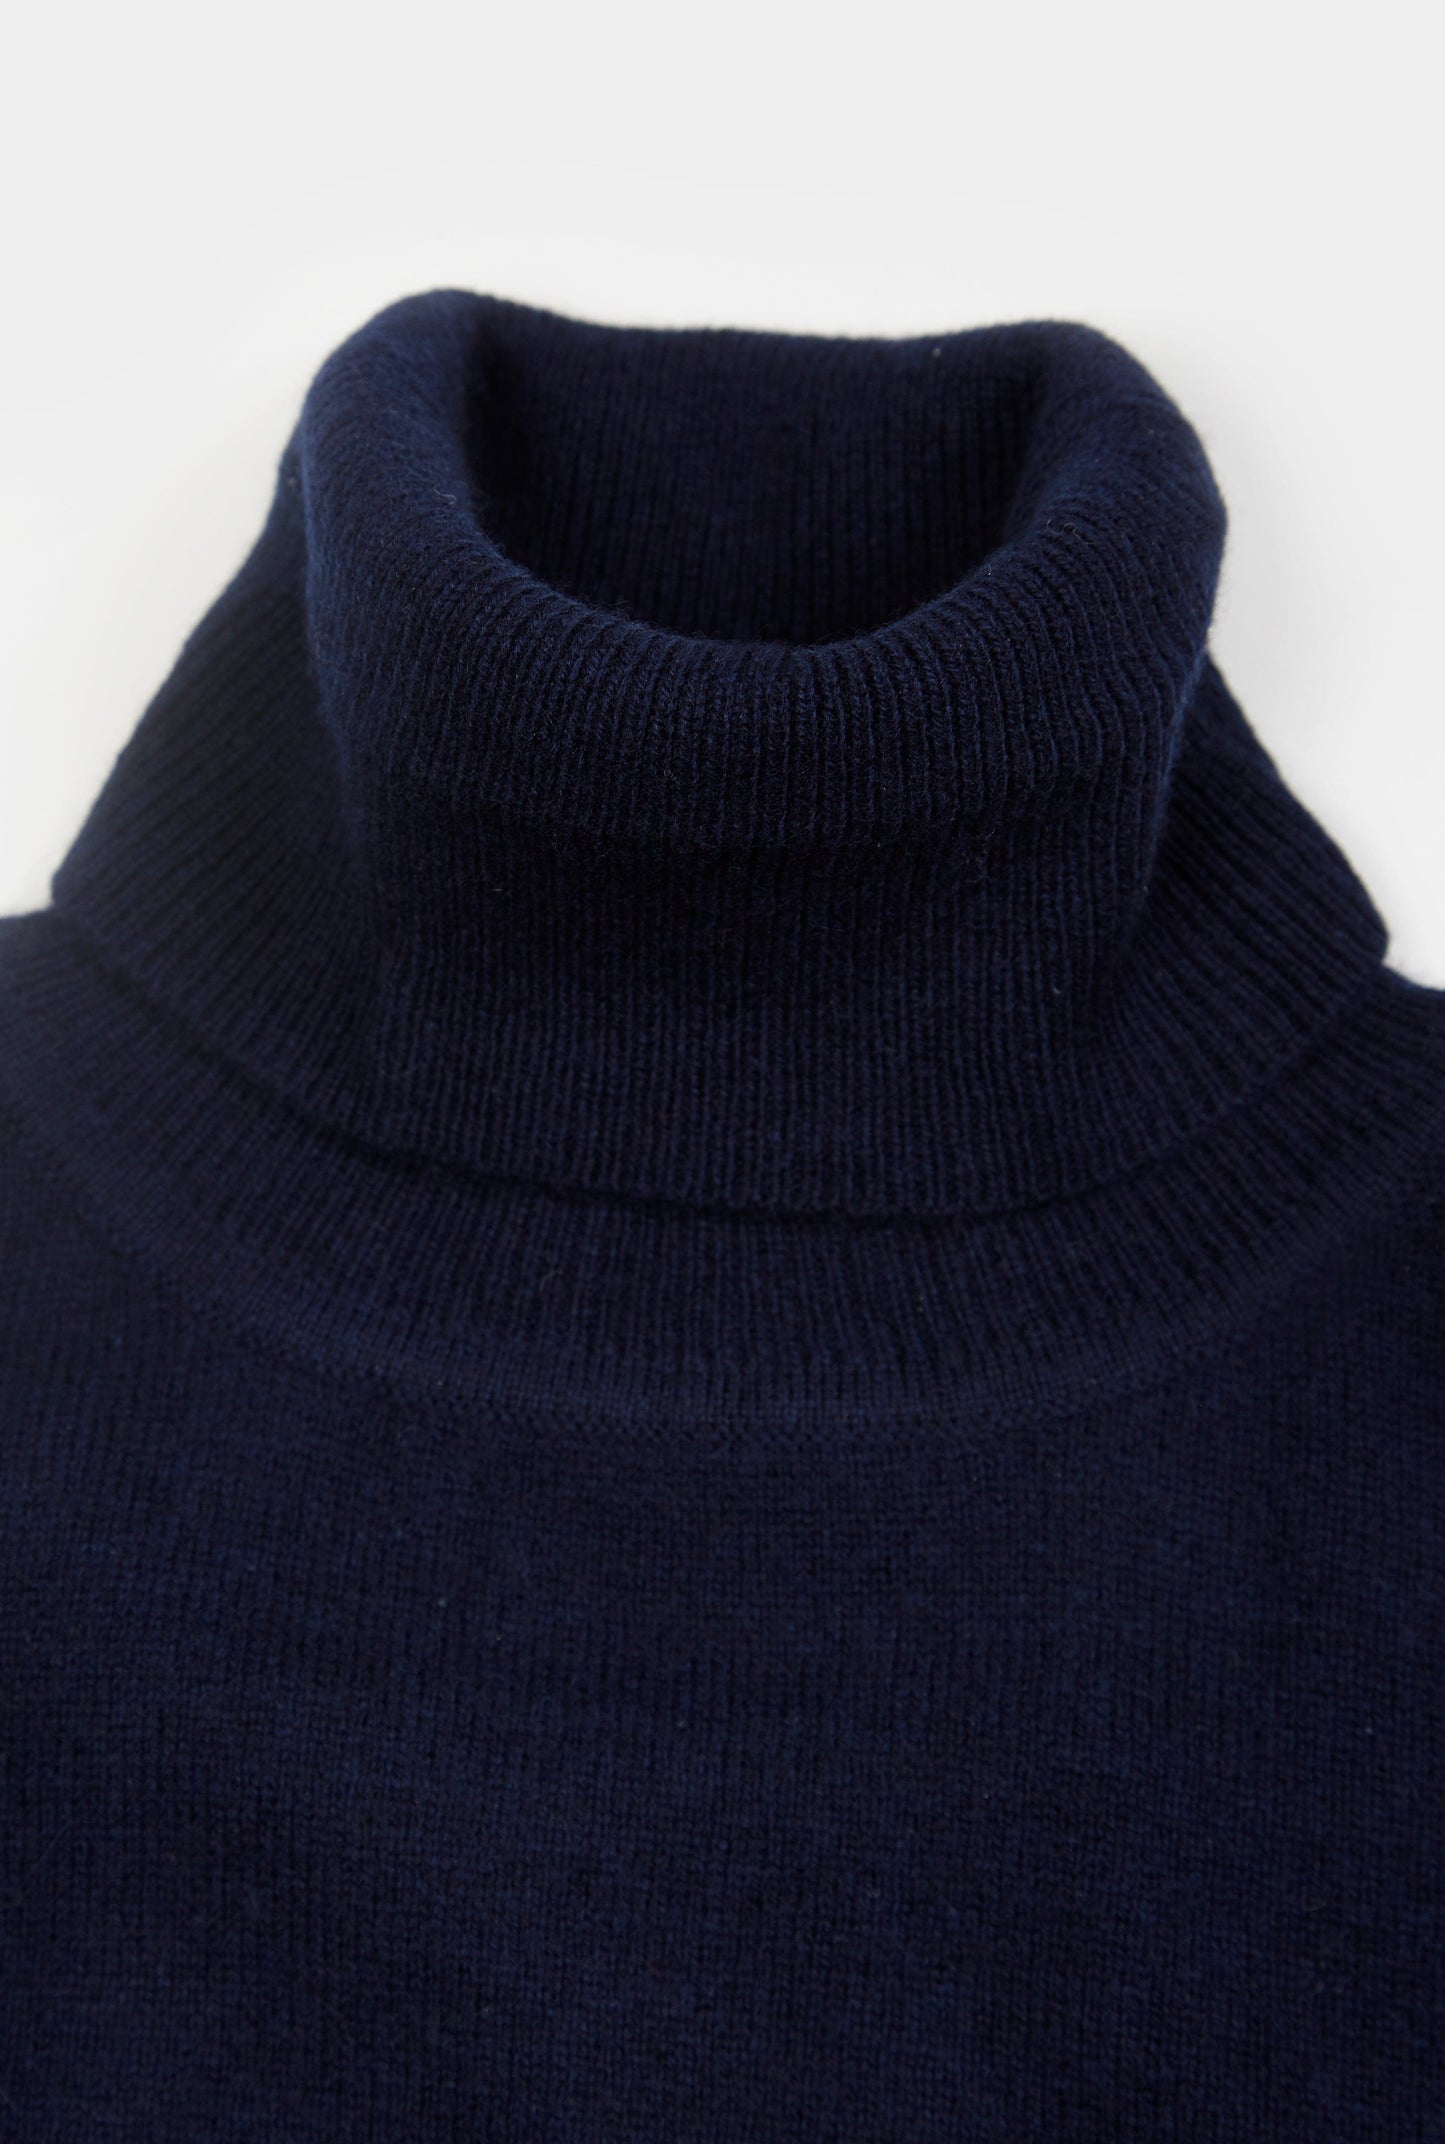 Womens Roll Neck Cashmere Jumper in Navy - Oxford Shirt Co.